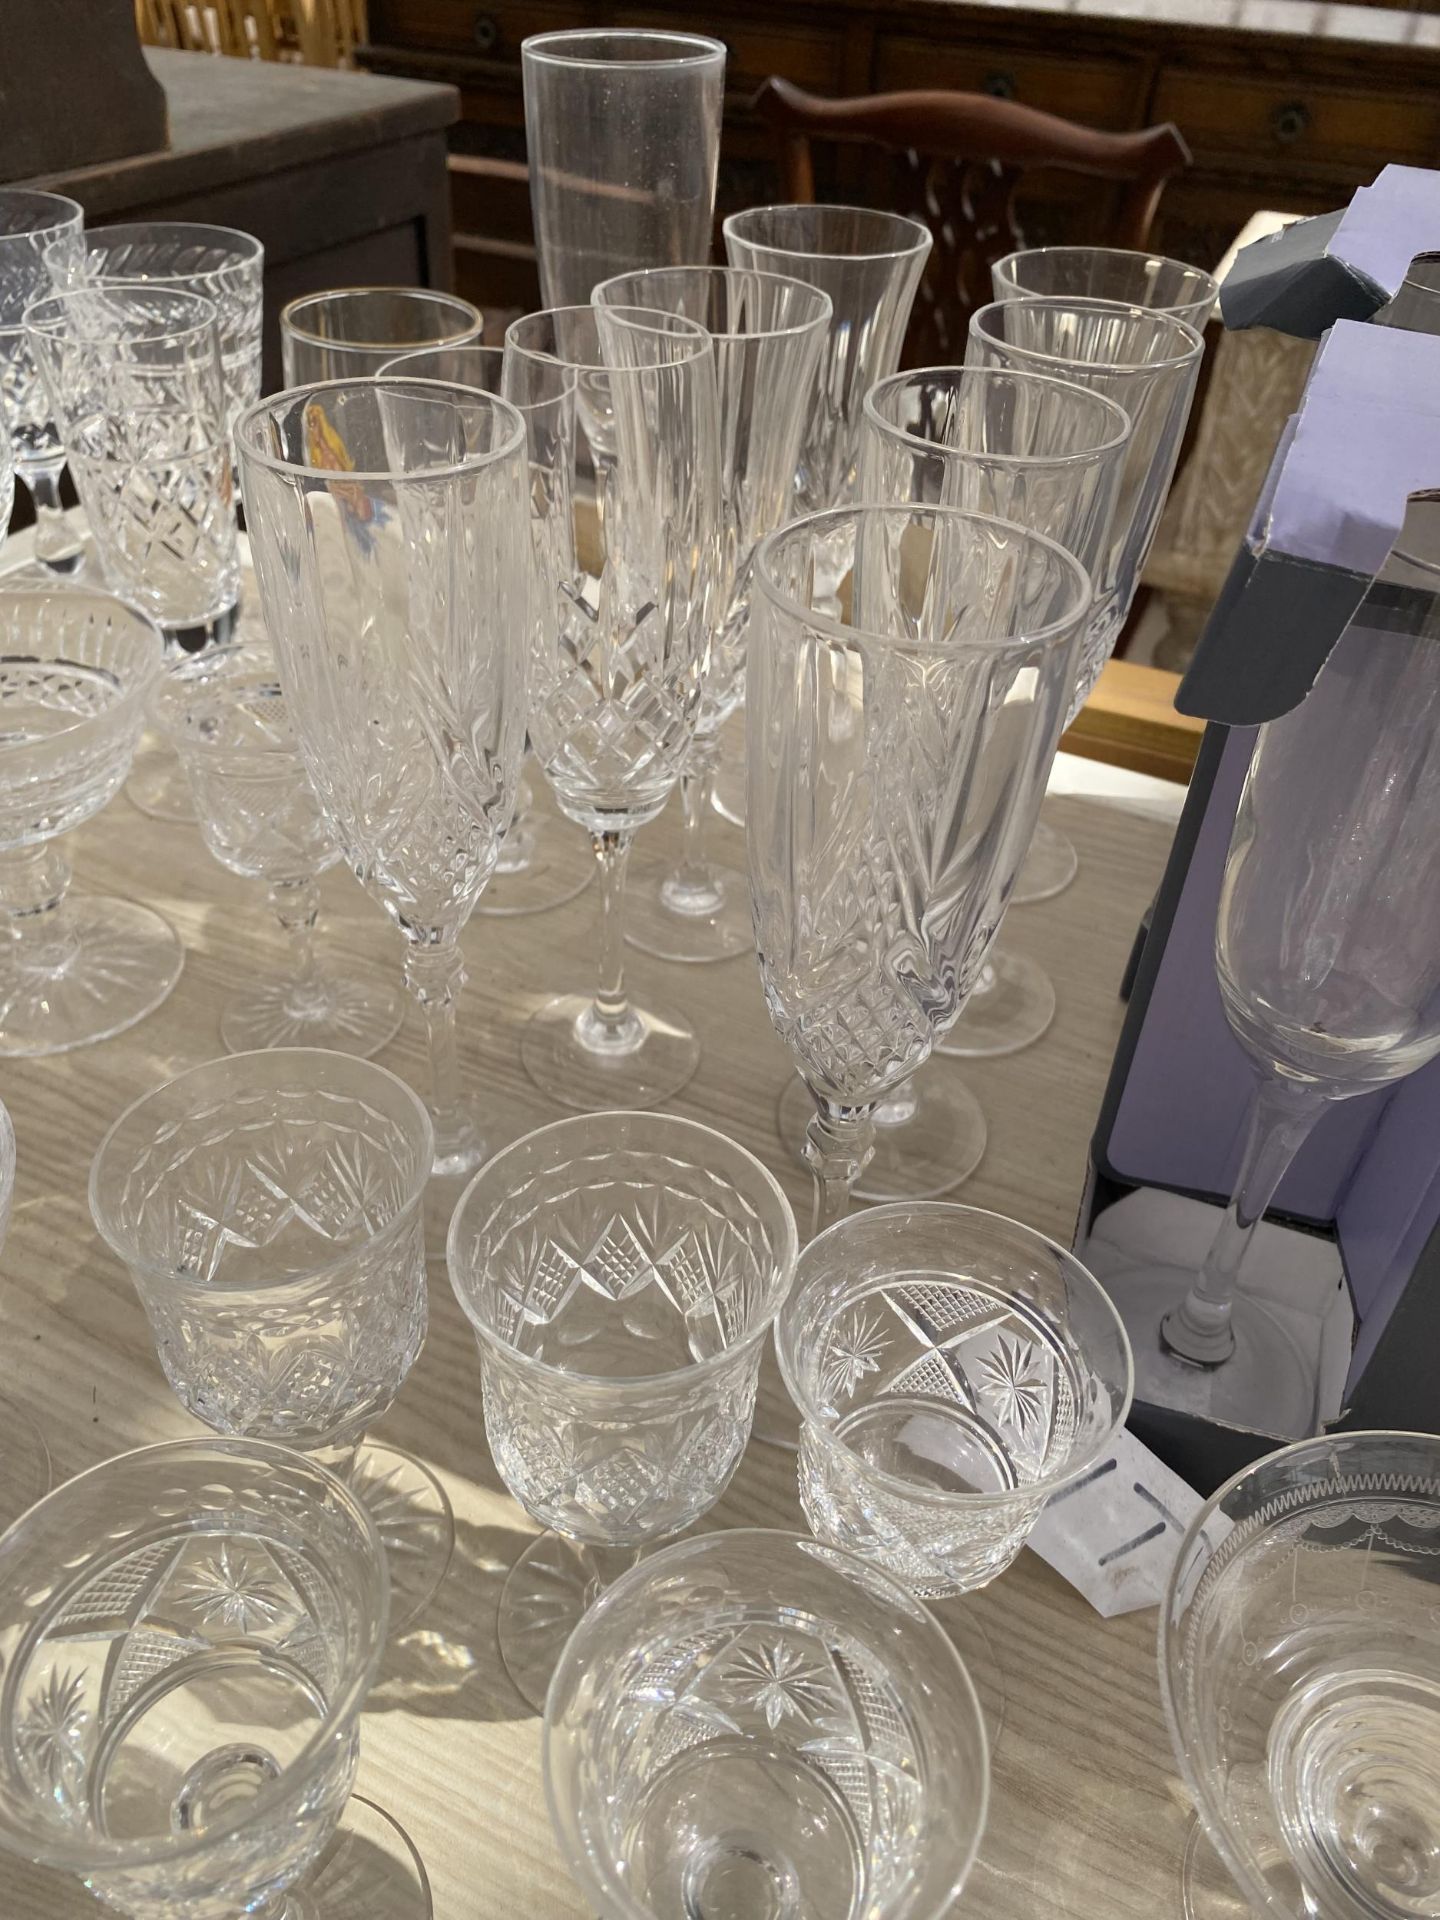 A LARGE QUANTITY OF ASSORTED GLASS WARE TO INCLUDE CHAMPAGNE FLUTES, WHISKET TUMBLERS AND WINE - Image 4 of 8